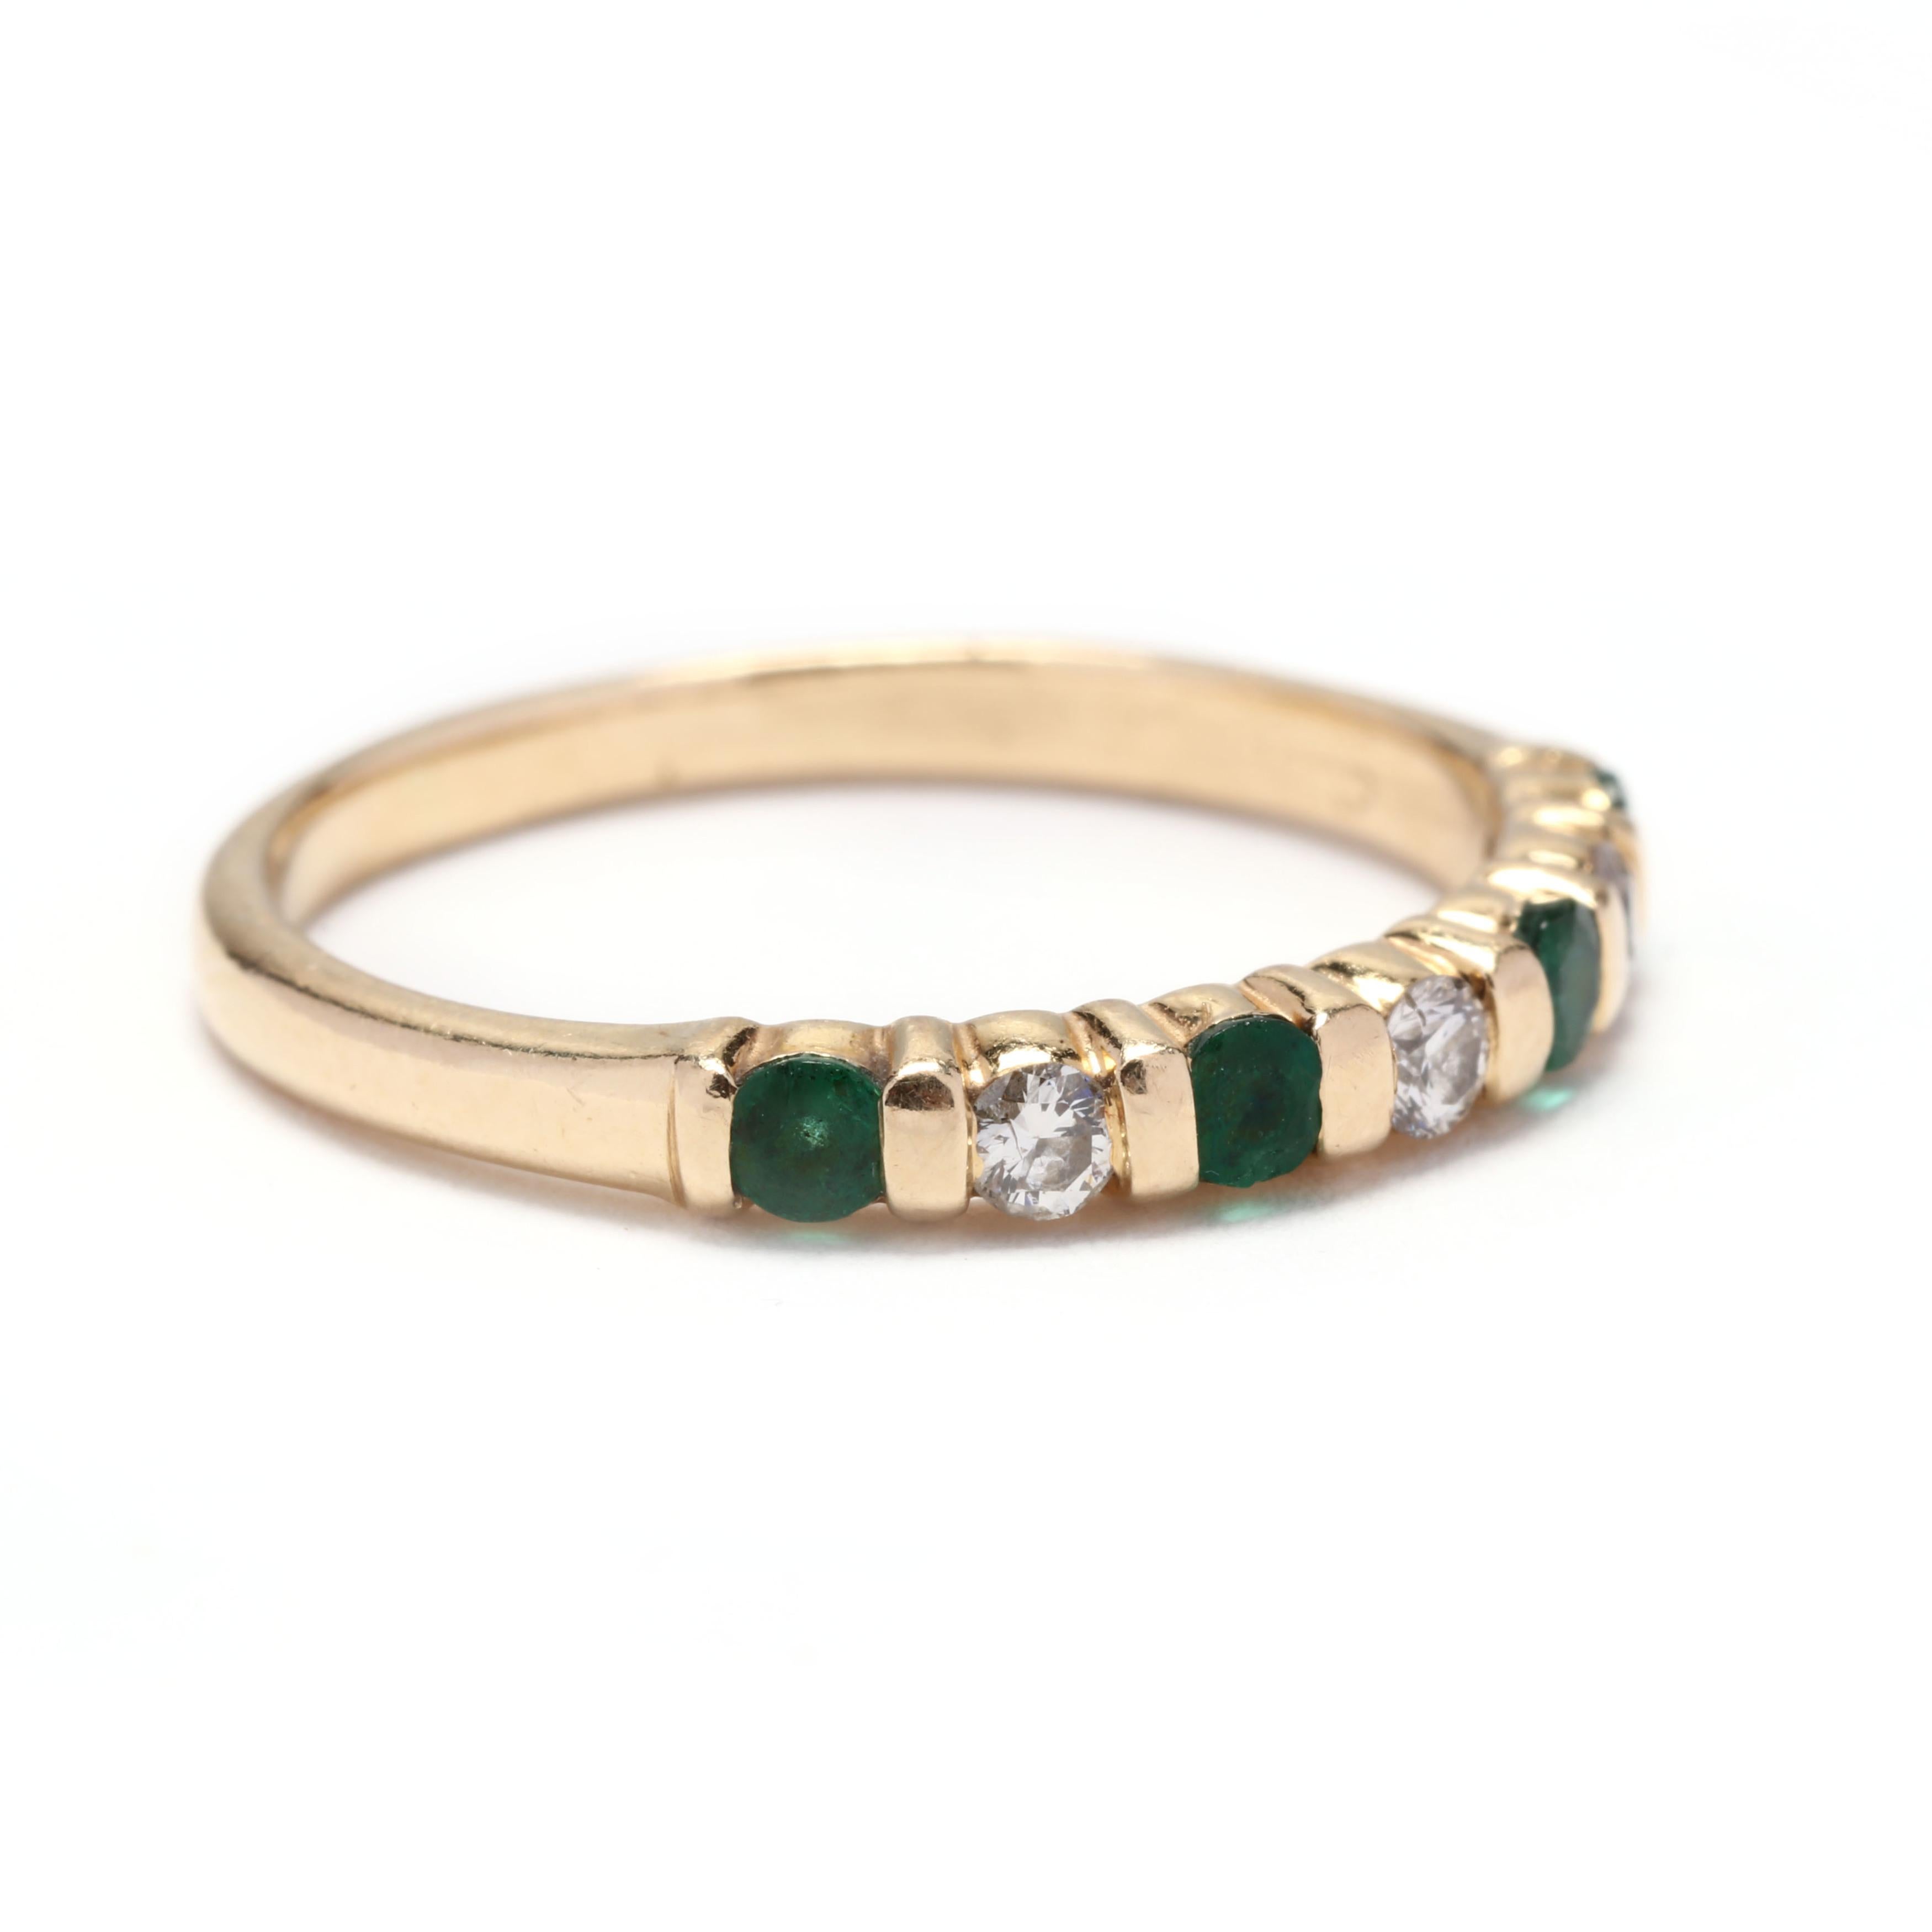 A 14 karat yellow gold, emerald and diamond stackable band ring. This ring features bar set alternating round cut emeralds weighing approximately .24 total carats and round brilliant cut diamond weighing approximately .15 total carats and a thin